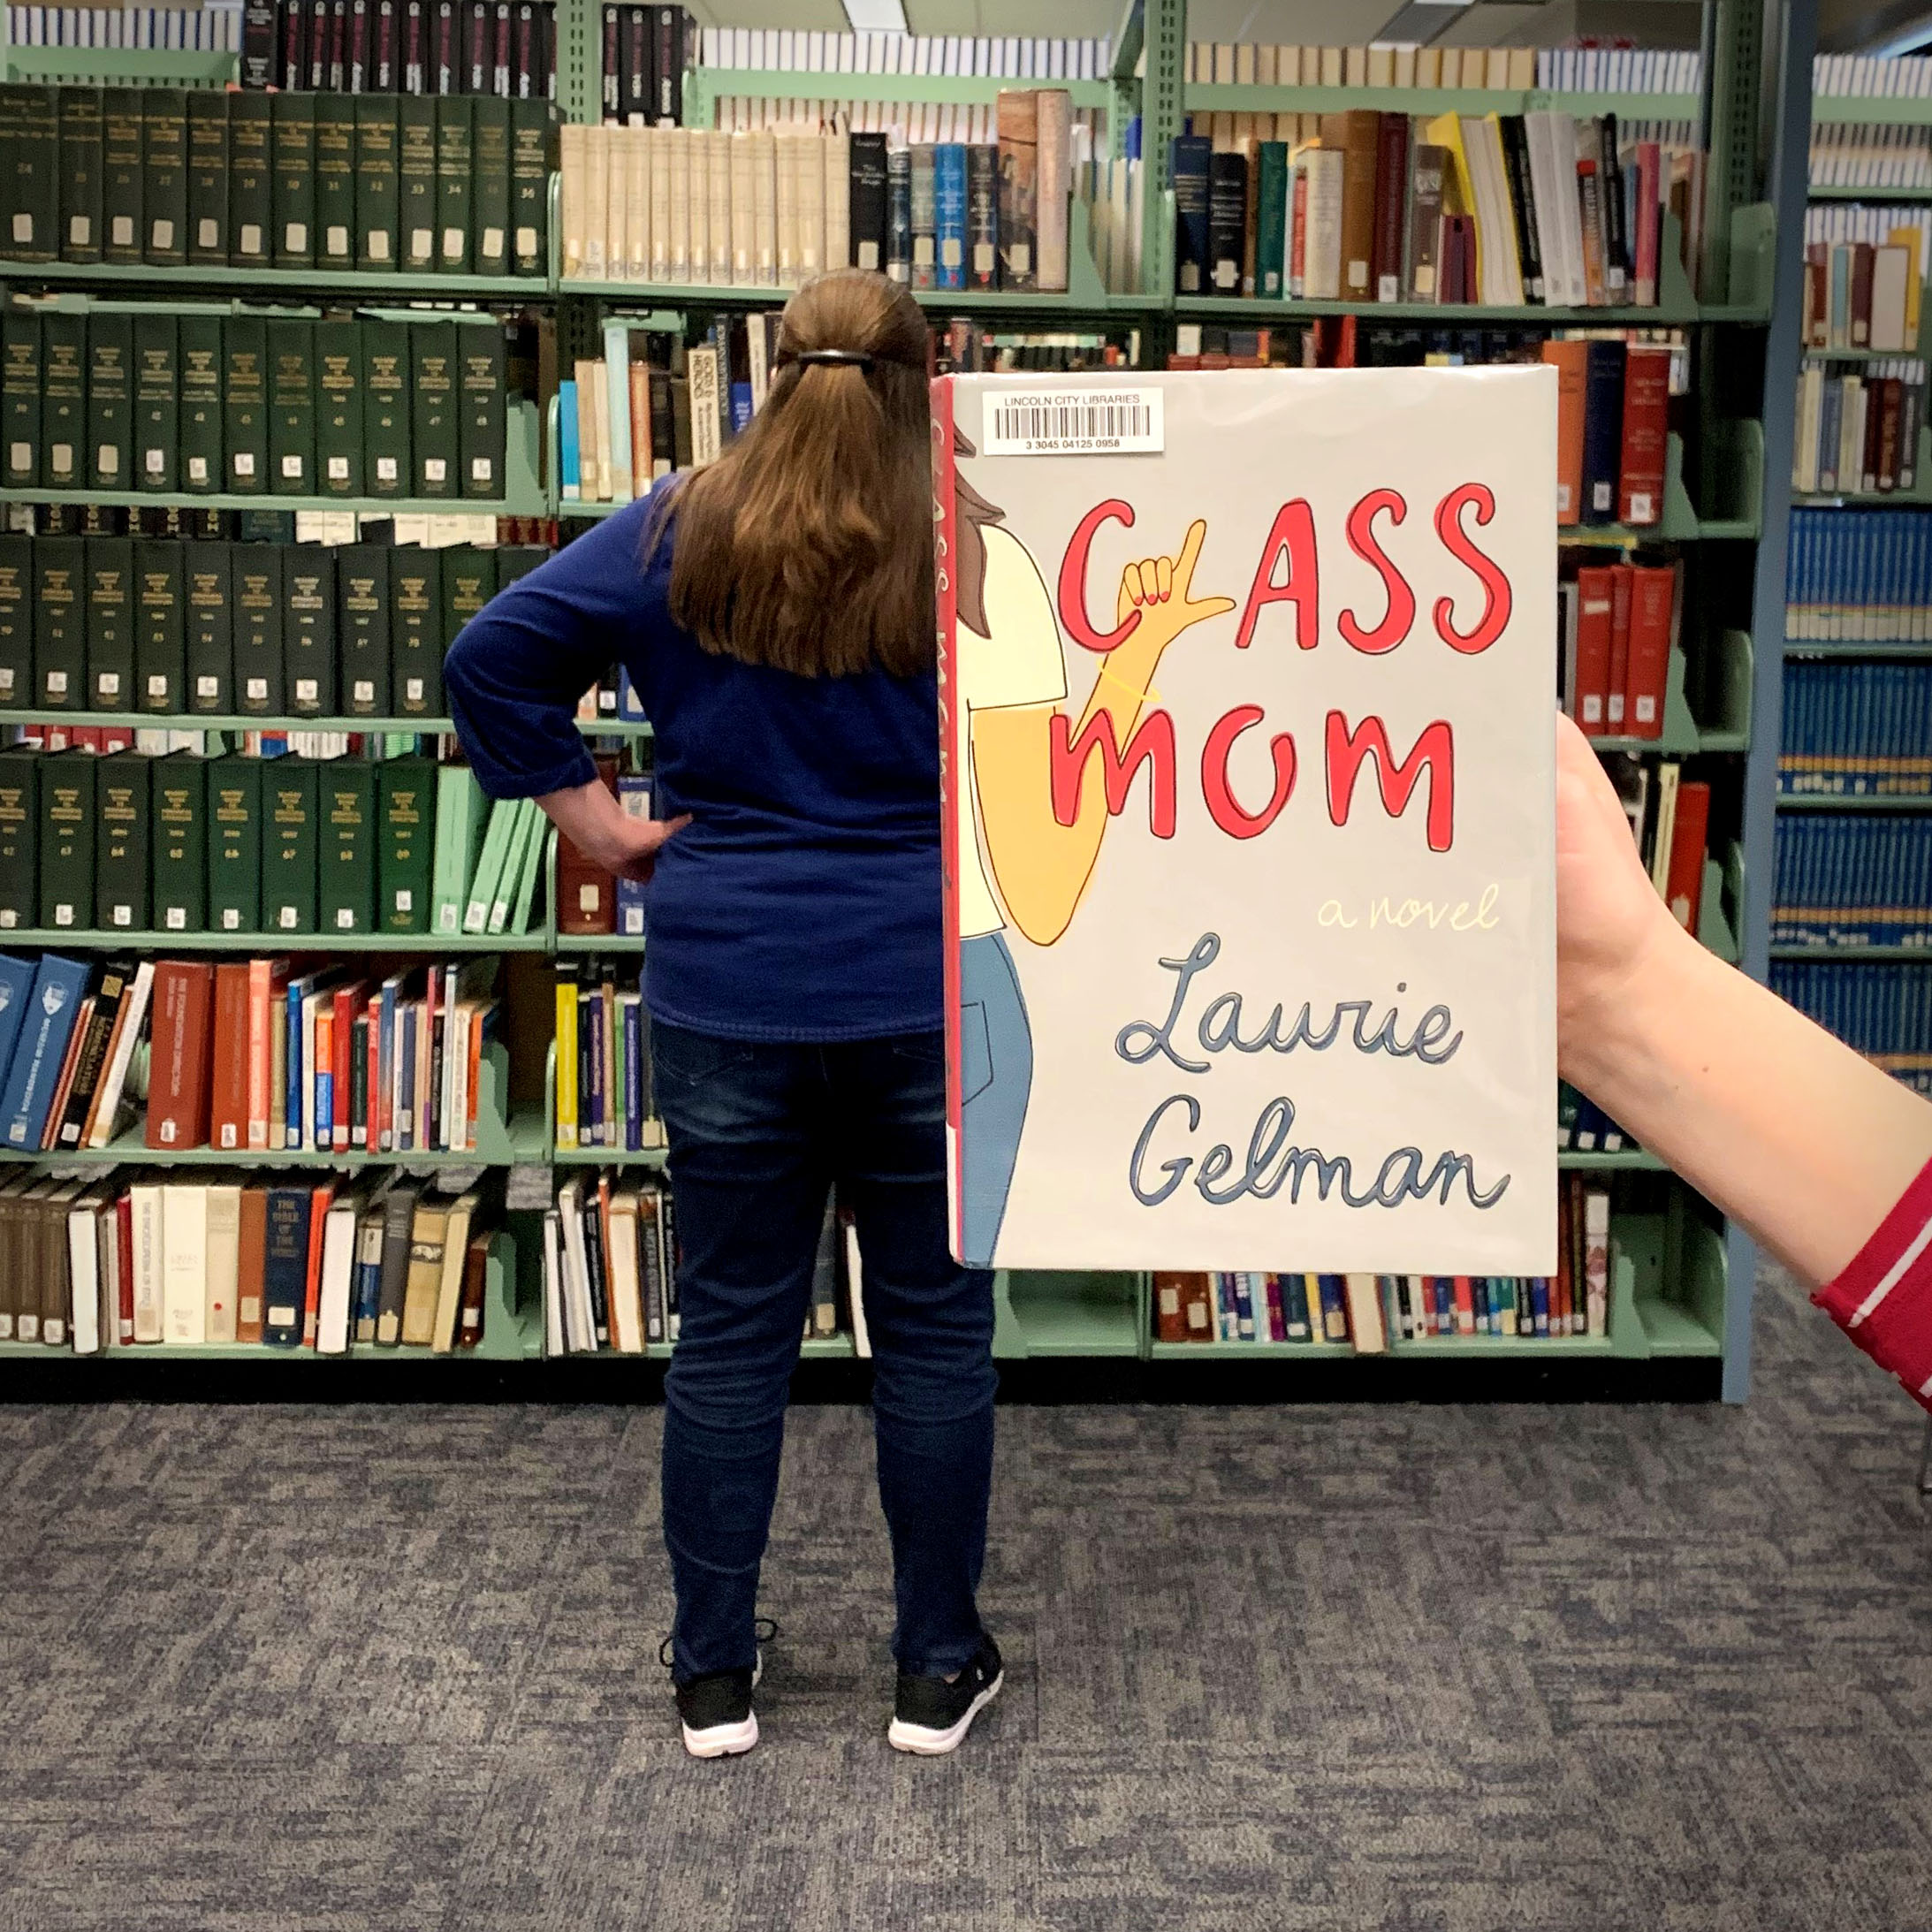 Book Face Friday photo "Class Mom" by Laurie Gelman